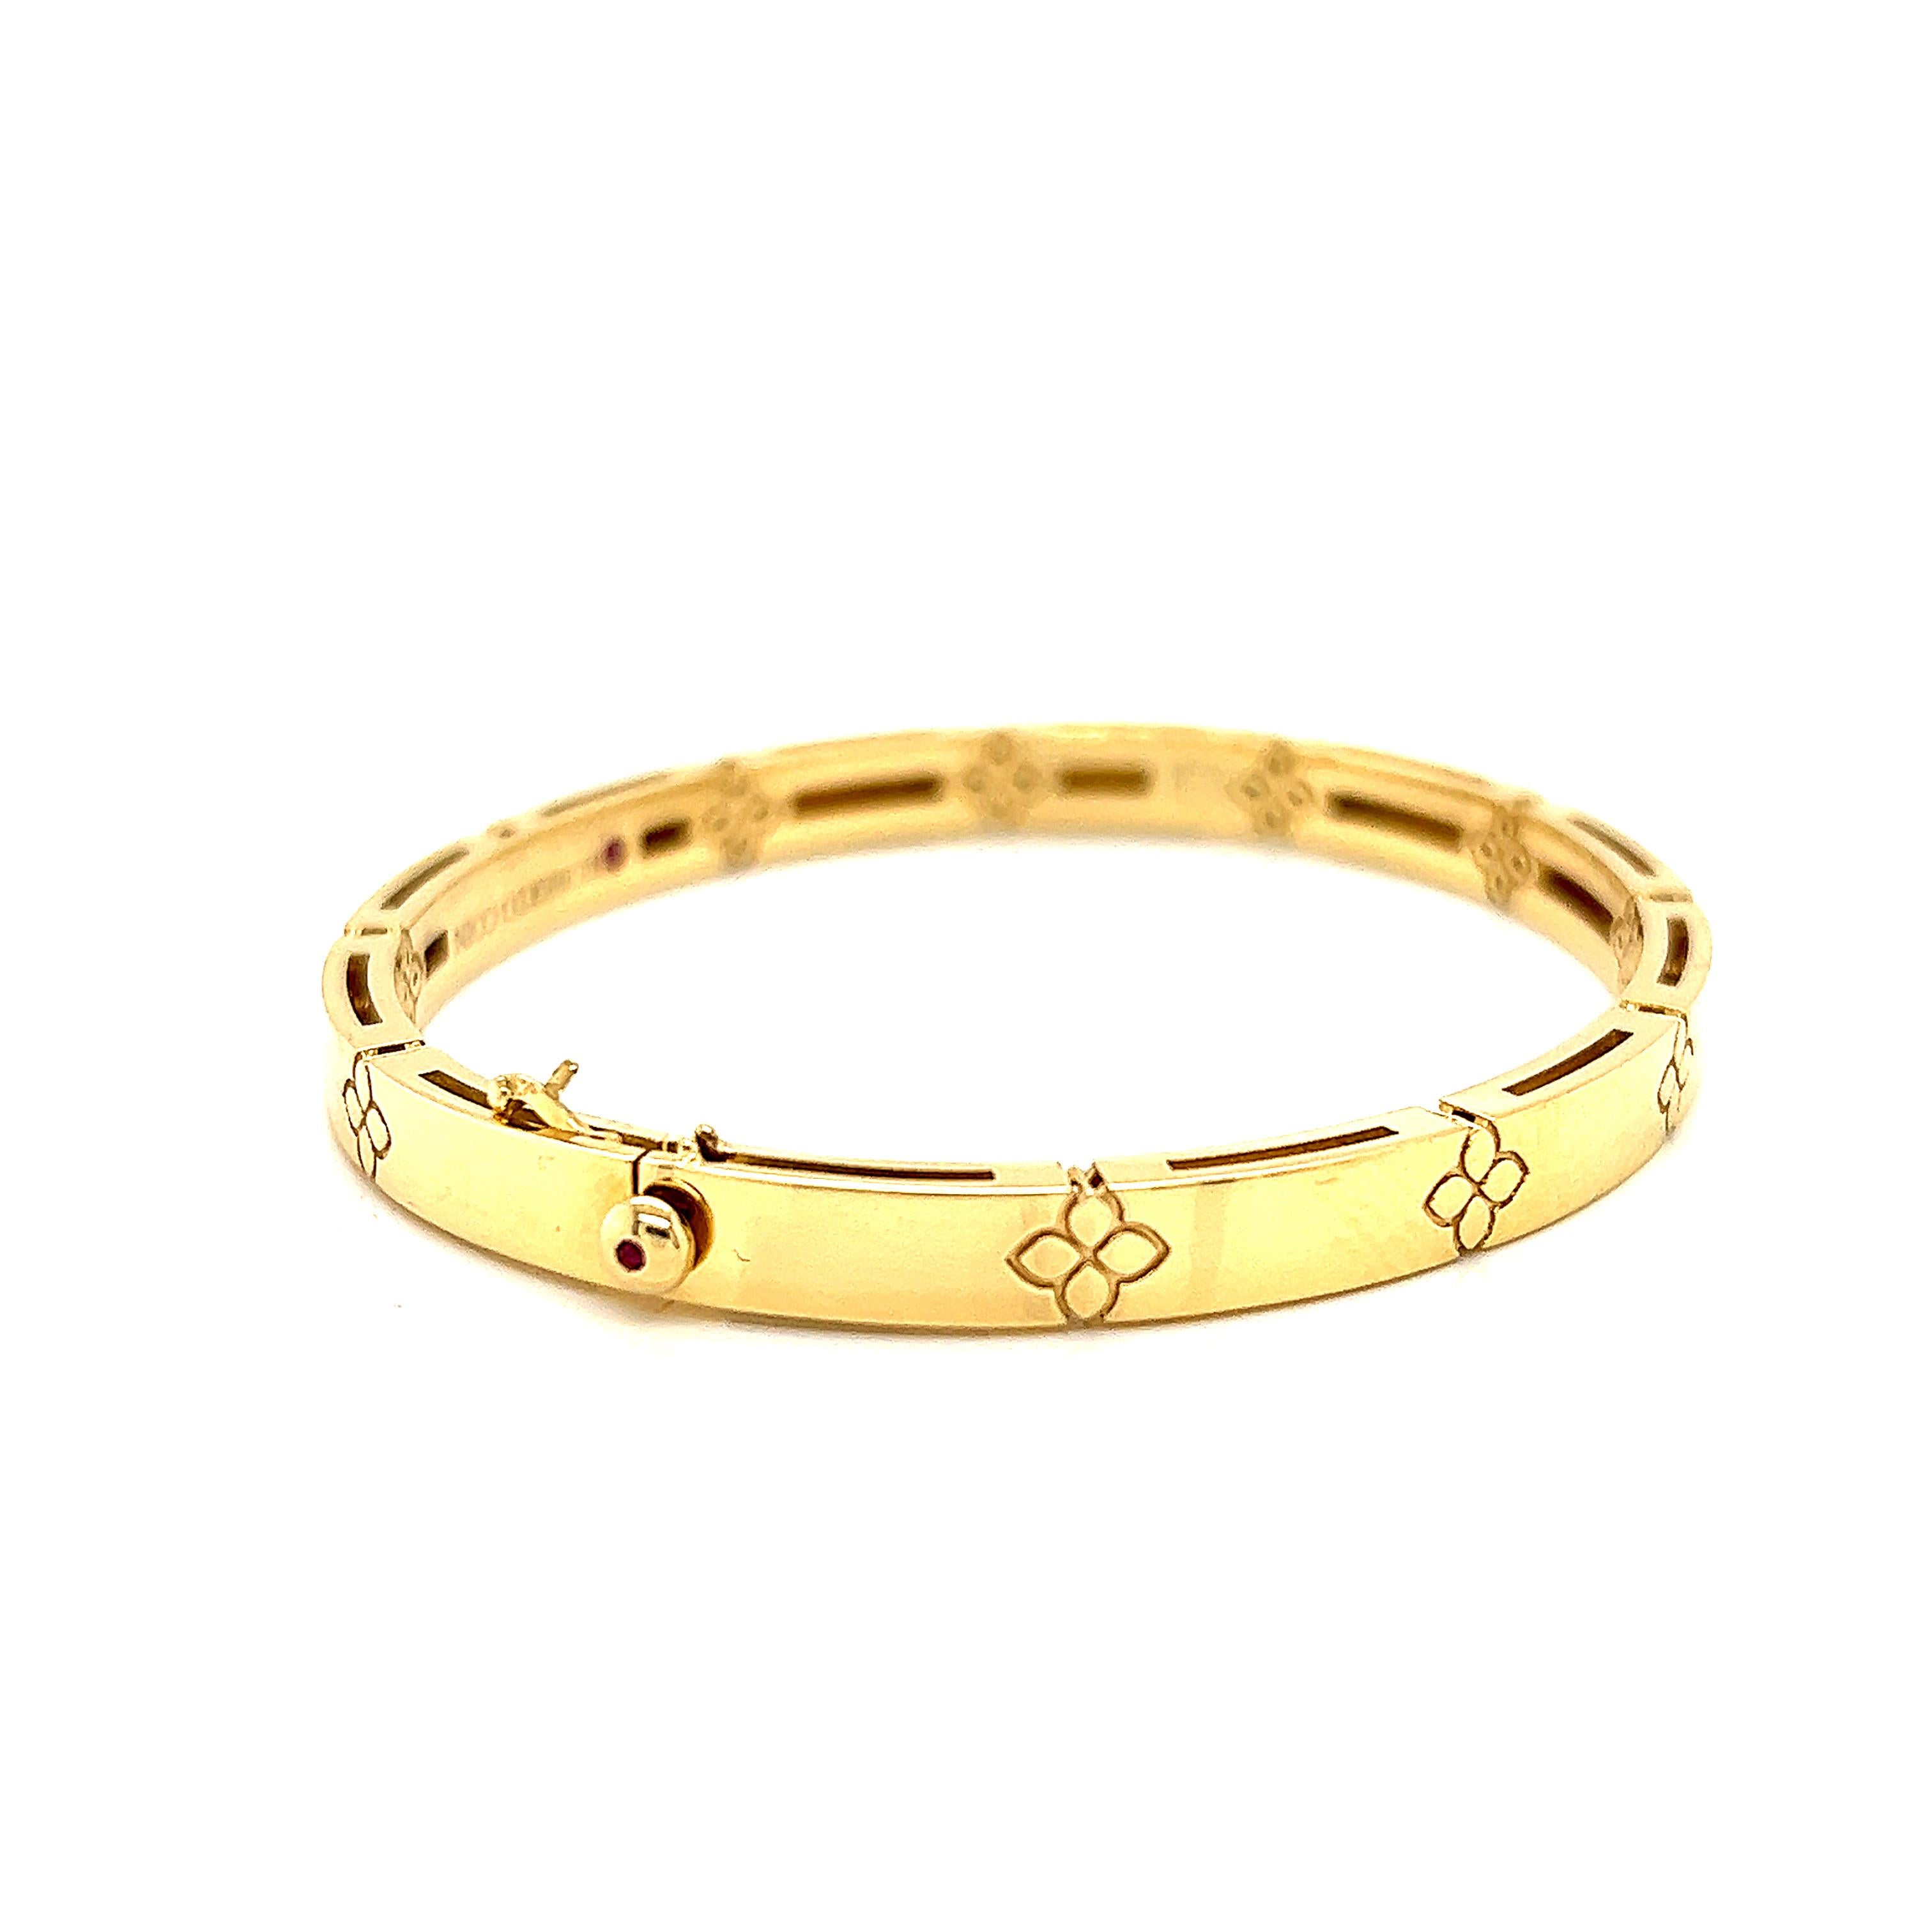 Crafted in 18K yellow gold with a classic high-polish finish, this elegant bangle from Roberto Coin's Love in Verona collection features a subtle debossed pattern of the designer's signature four petal flower. Measuring 6 mm wide this is the medium